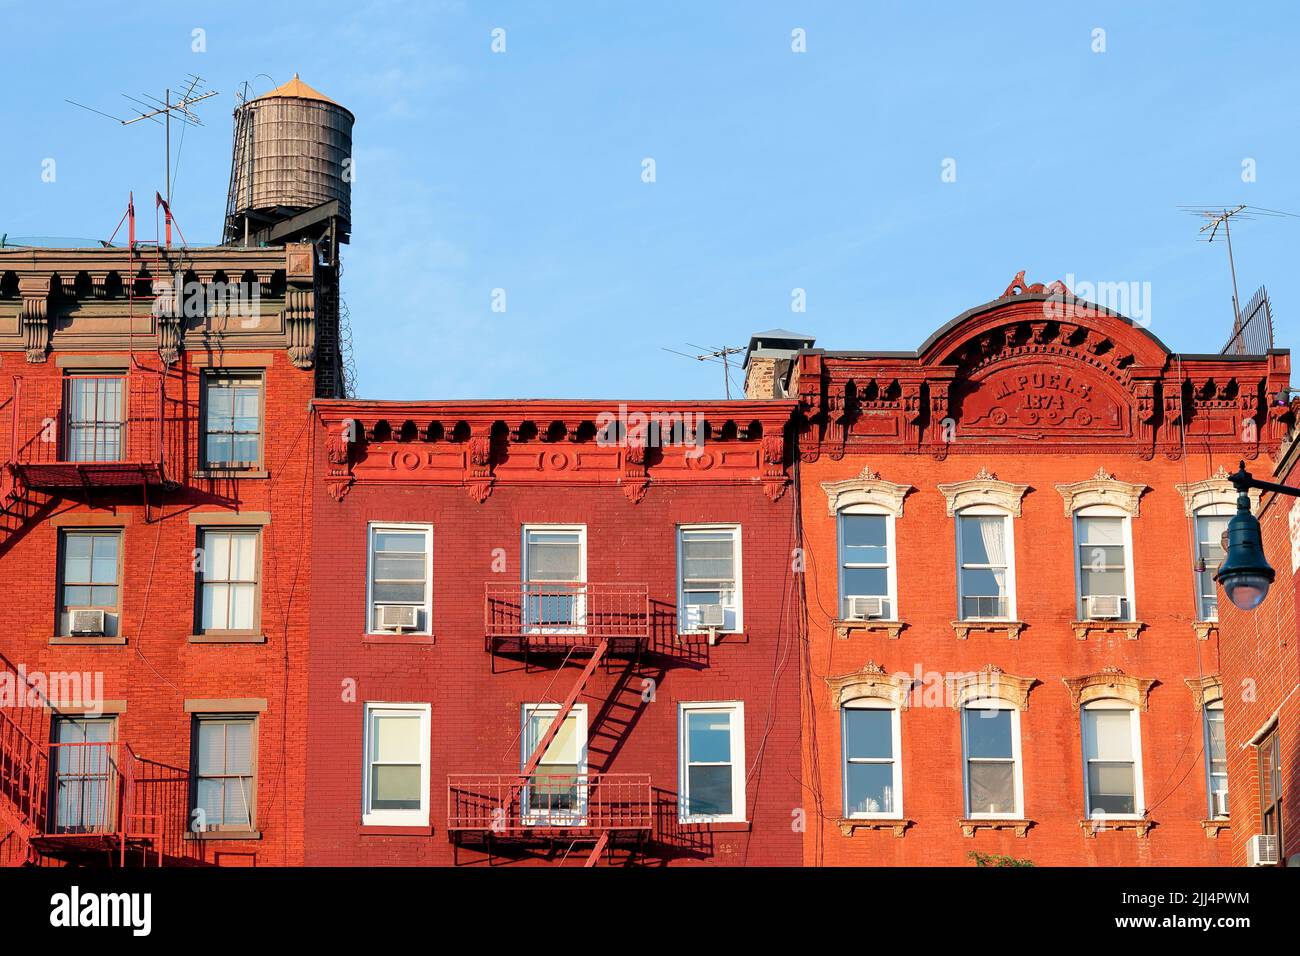 New York City tenement buildings in Manhattan's Greenwich Village neighborhood near sunset with wooden water tank and rooftop tv attennas. Stock Photo